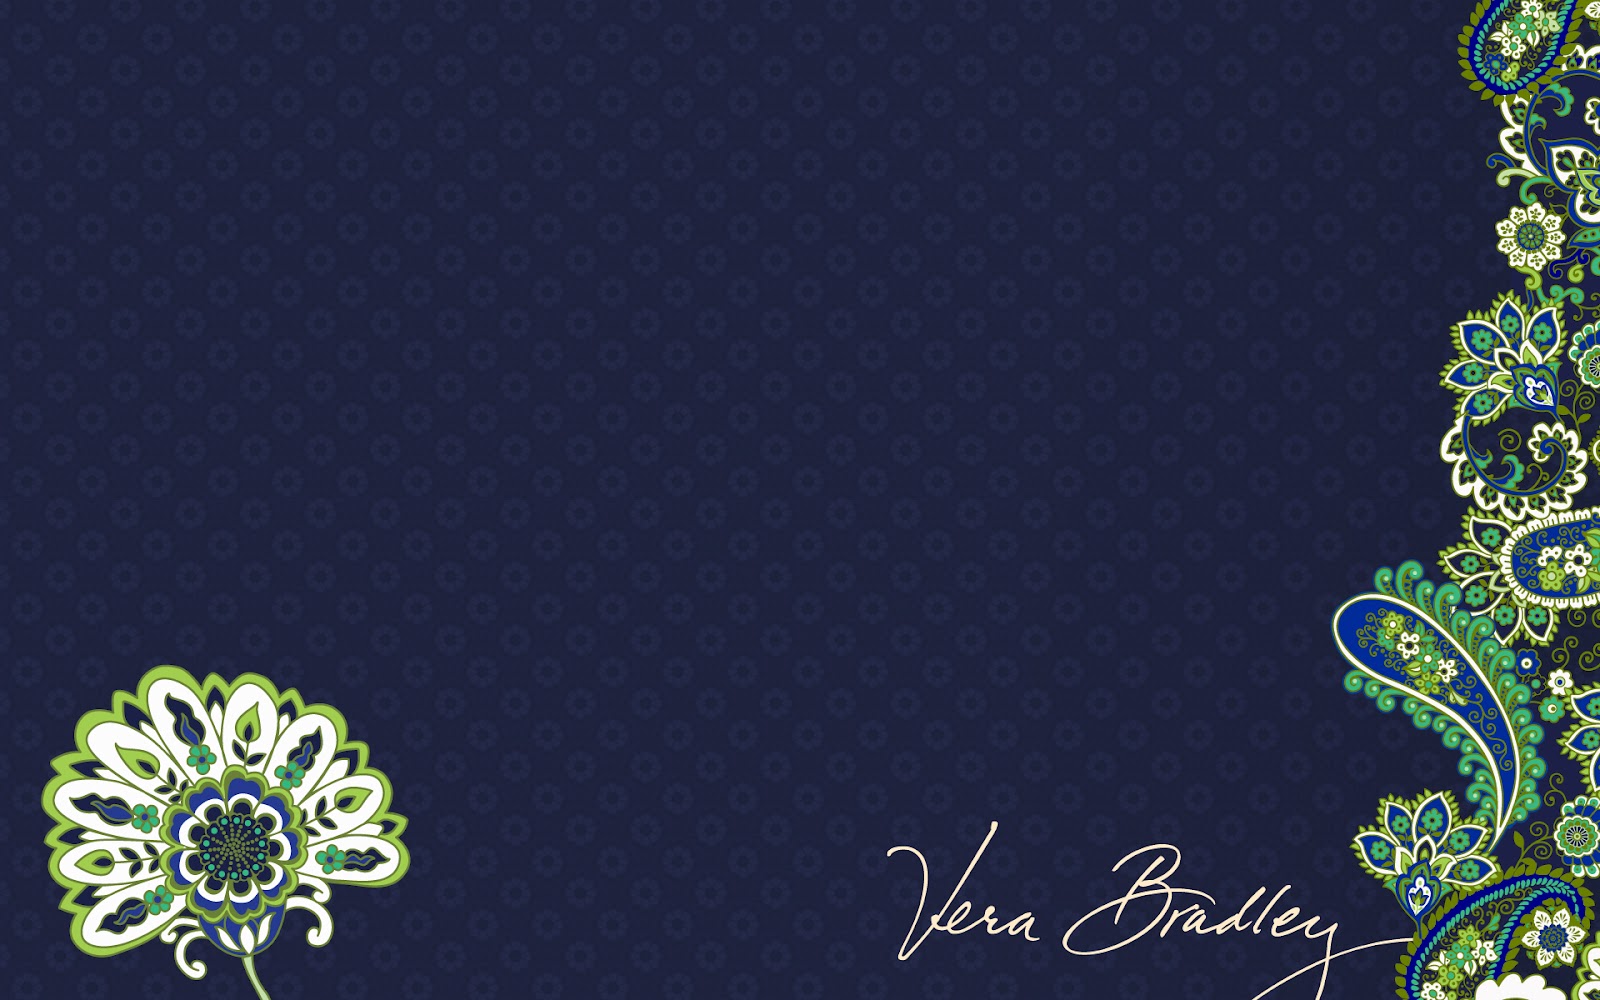 Here Are Some Vera Bradley Wp S That I Found On The Web They